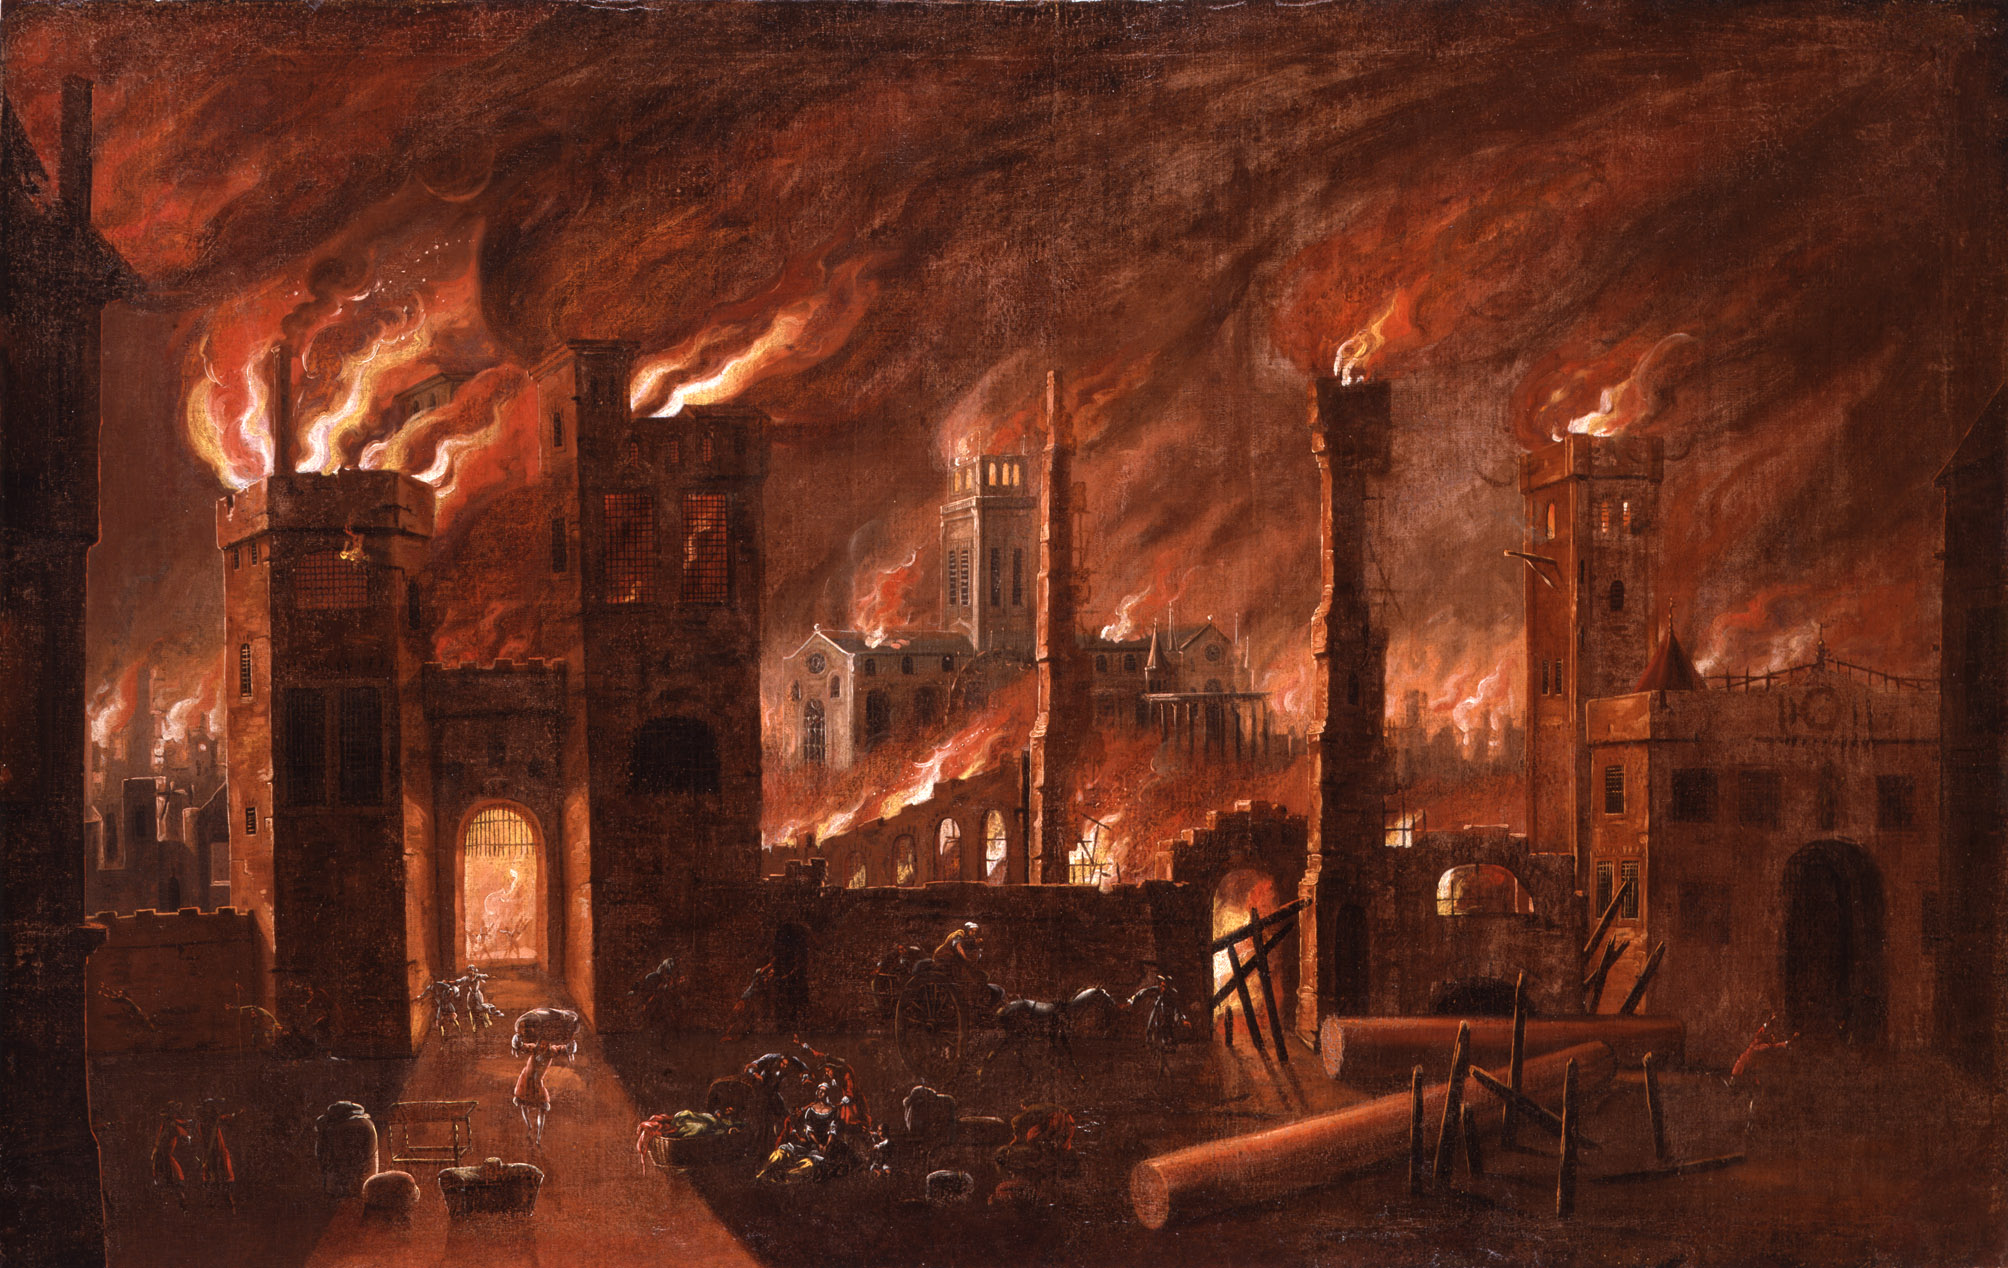 Ludgate and Old St Pauls' Ablaze